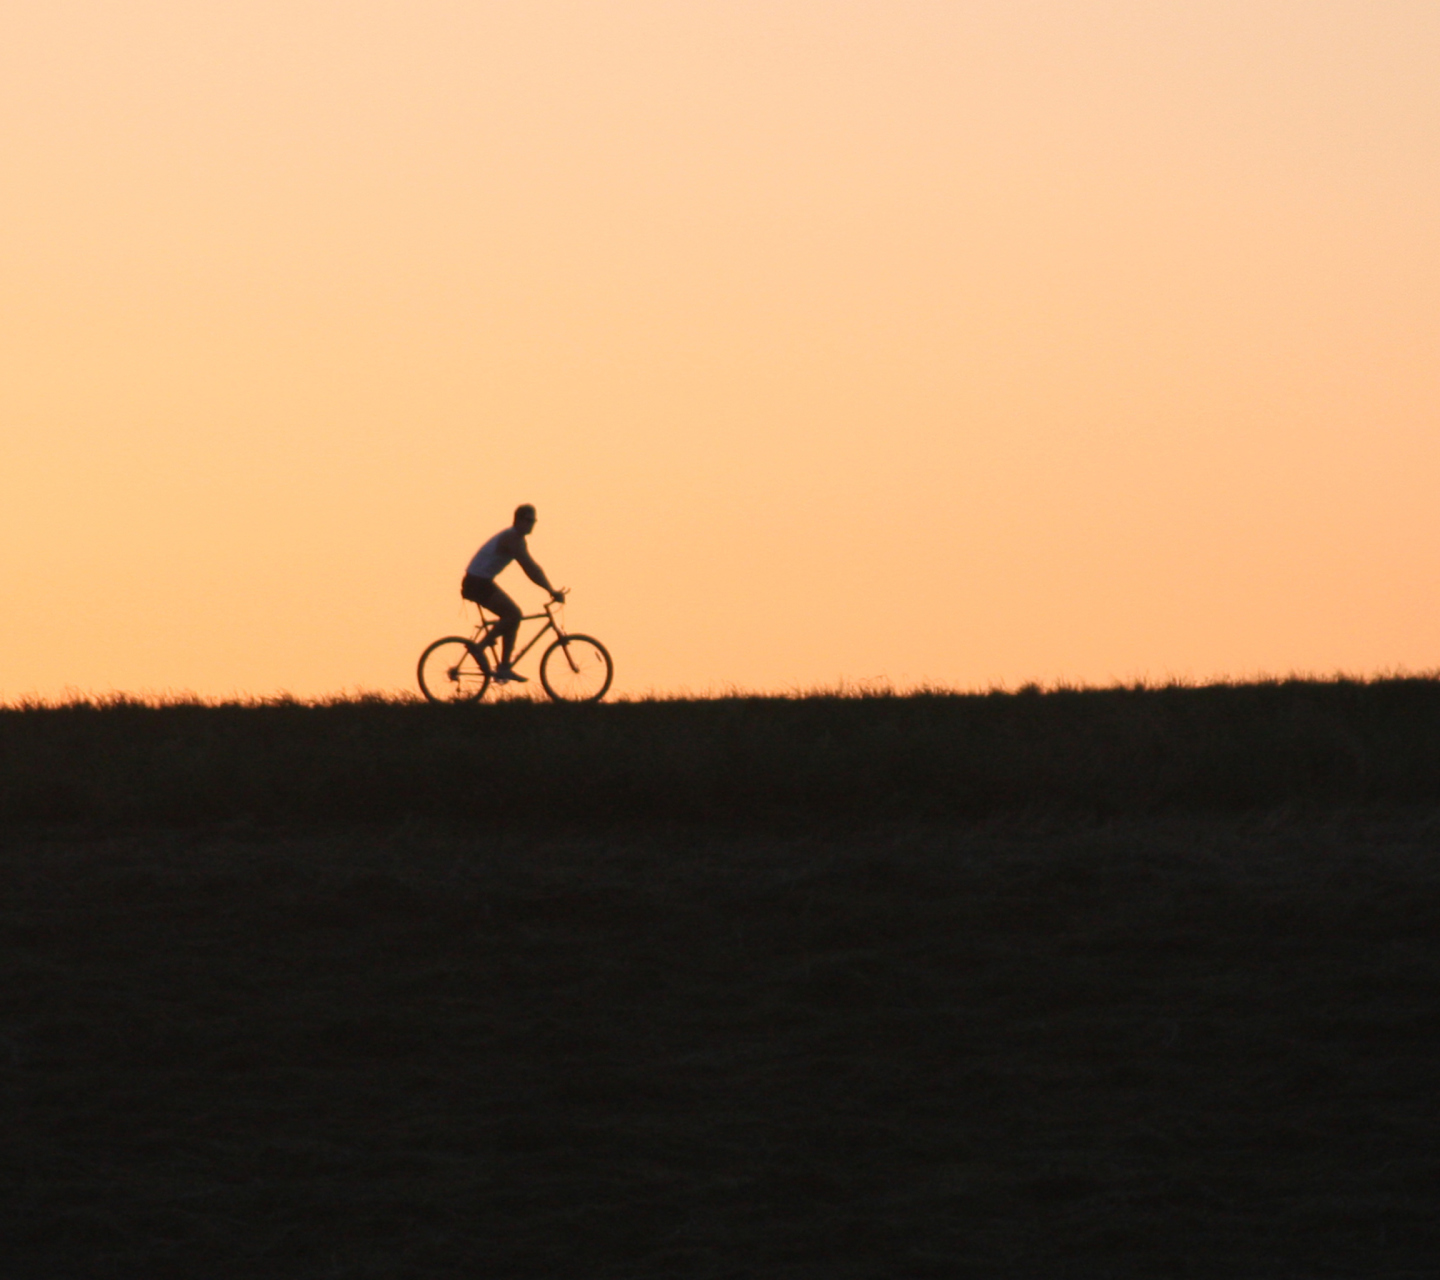 Bicycle Ride In Field wallpaper 1440x1280